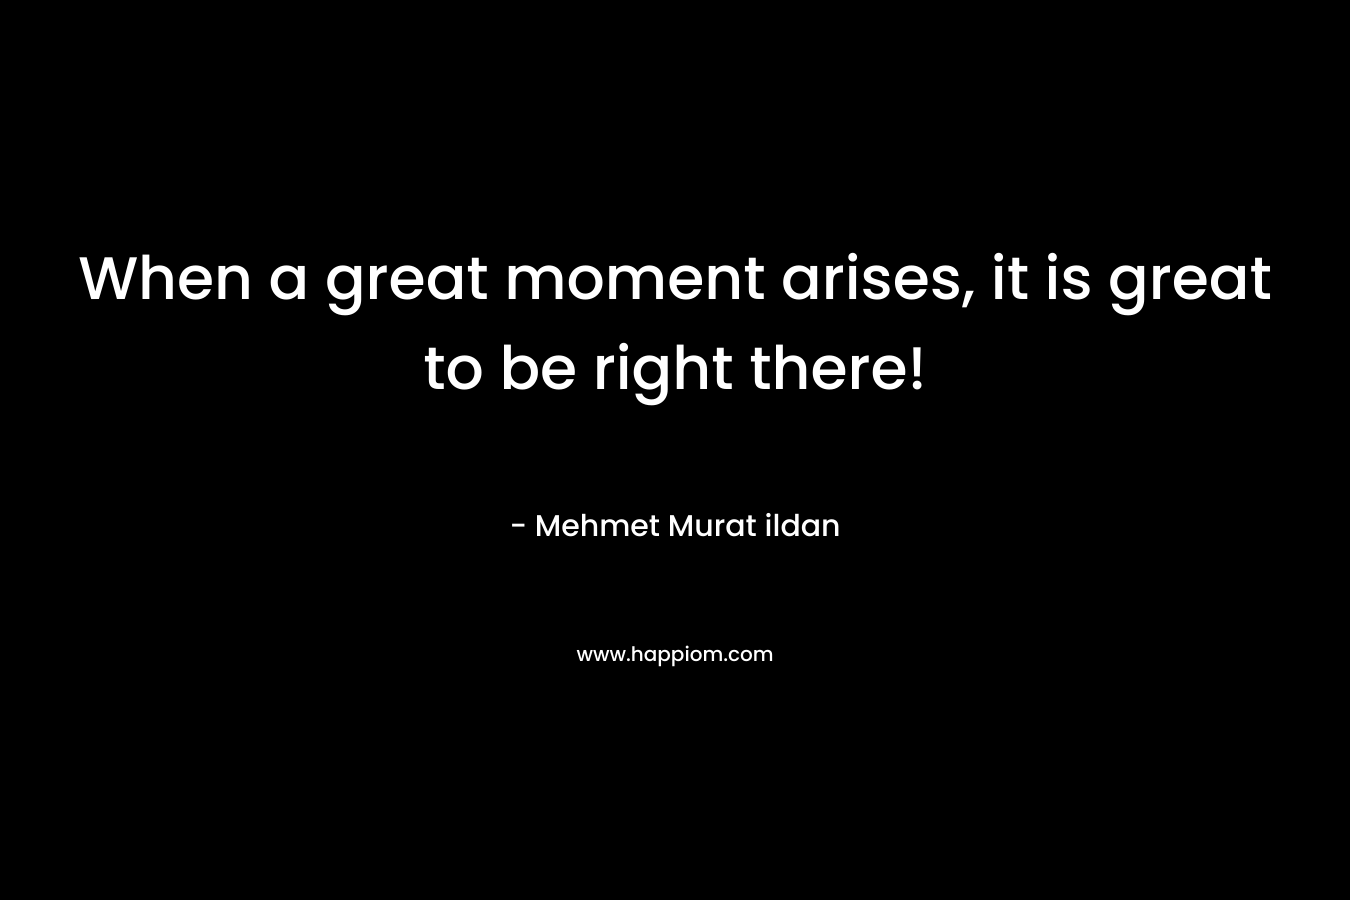 When a great moment arises, it is great to be right there! – Mehmet Murat ildan